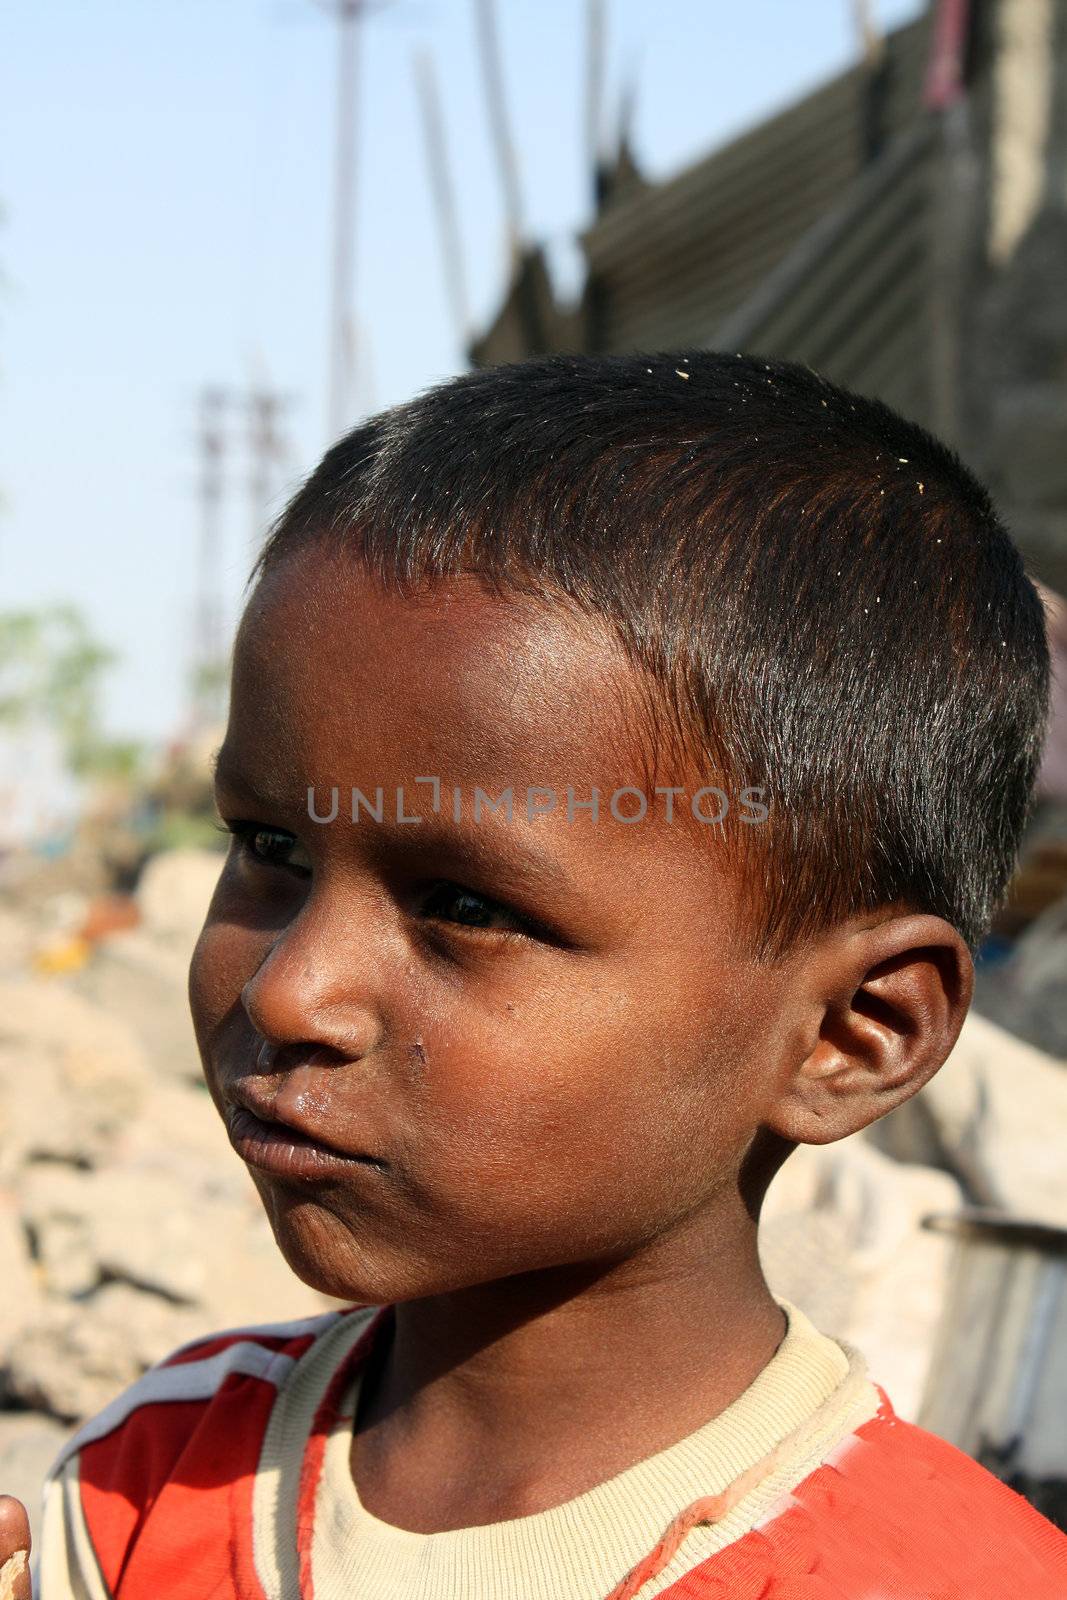 A portrait of a daydreaming poor beggar kid from India.